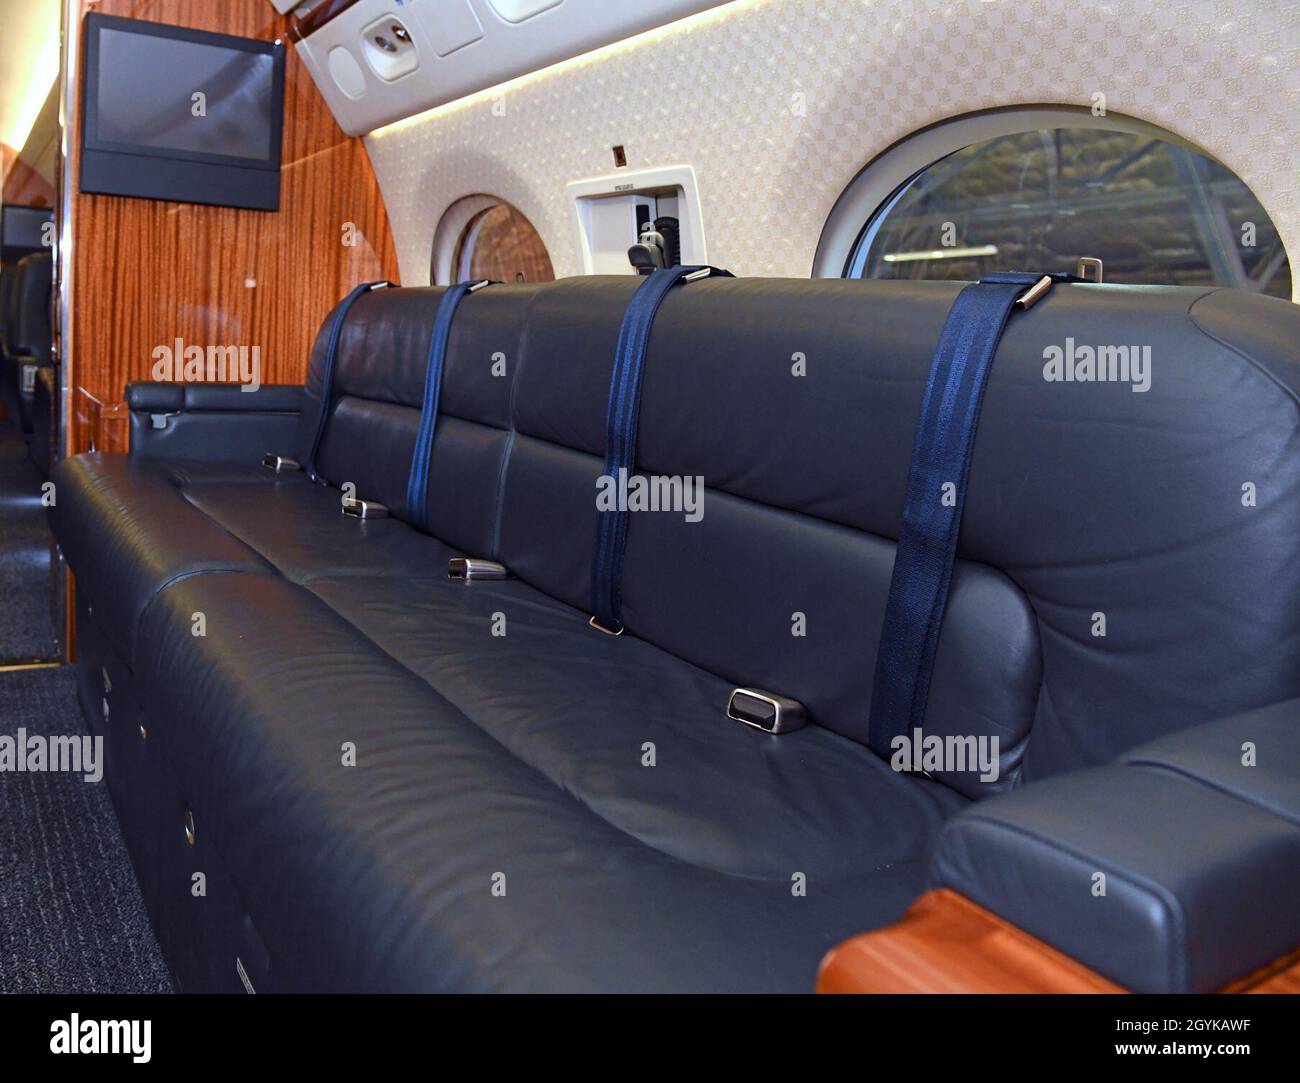 The cabin area of a C-37B Gulfstream 550 aircraft assigned to the 99th Airlift Squadron on Joint Base Andrews, Maryland Jan. 16, 2020. The 99th AS flies approximately 400 missions each year transporting senior civilian and military leaders around the world. (U.S. Air Force photo by Tech. Sgt. Kentavist P. Brackin) Stock Photo